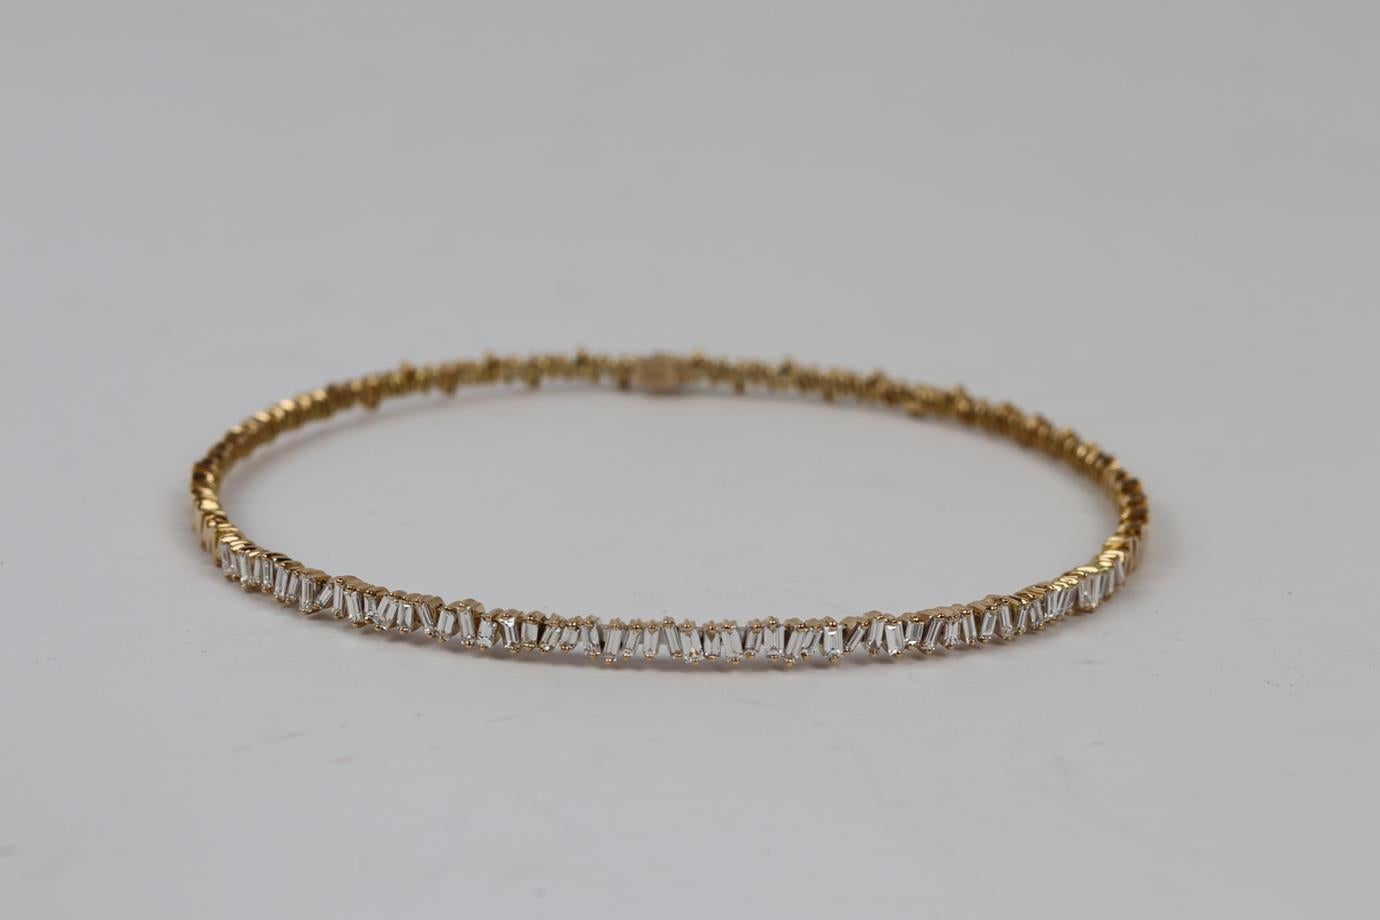 Suzanne Kalan 18 karat rose gold baguette diamond choker. 18K rose gold. Hallmarked: 18 KT. Total Item Weight: 28 g. Gemstone: Diamond. Carat Weight: 3.00. Stone Count: 54. Stone Shape: Baguette. Comes with box. Chain Length: 13 in. Very good